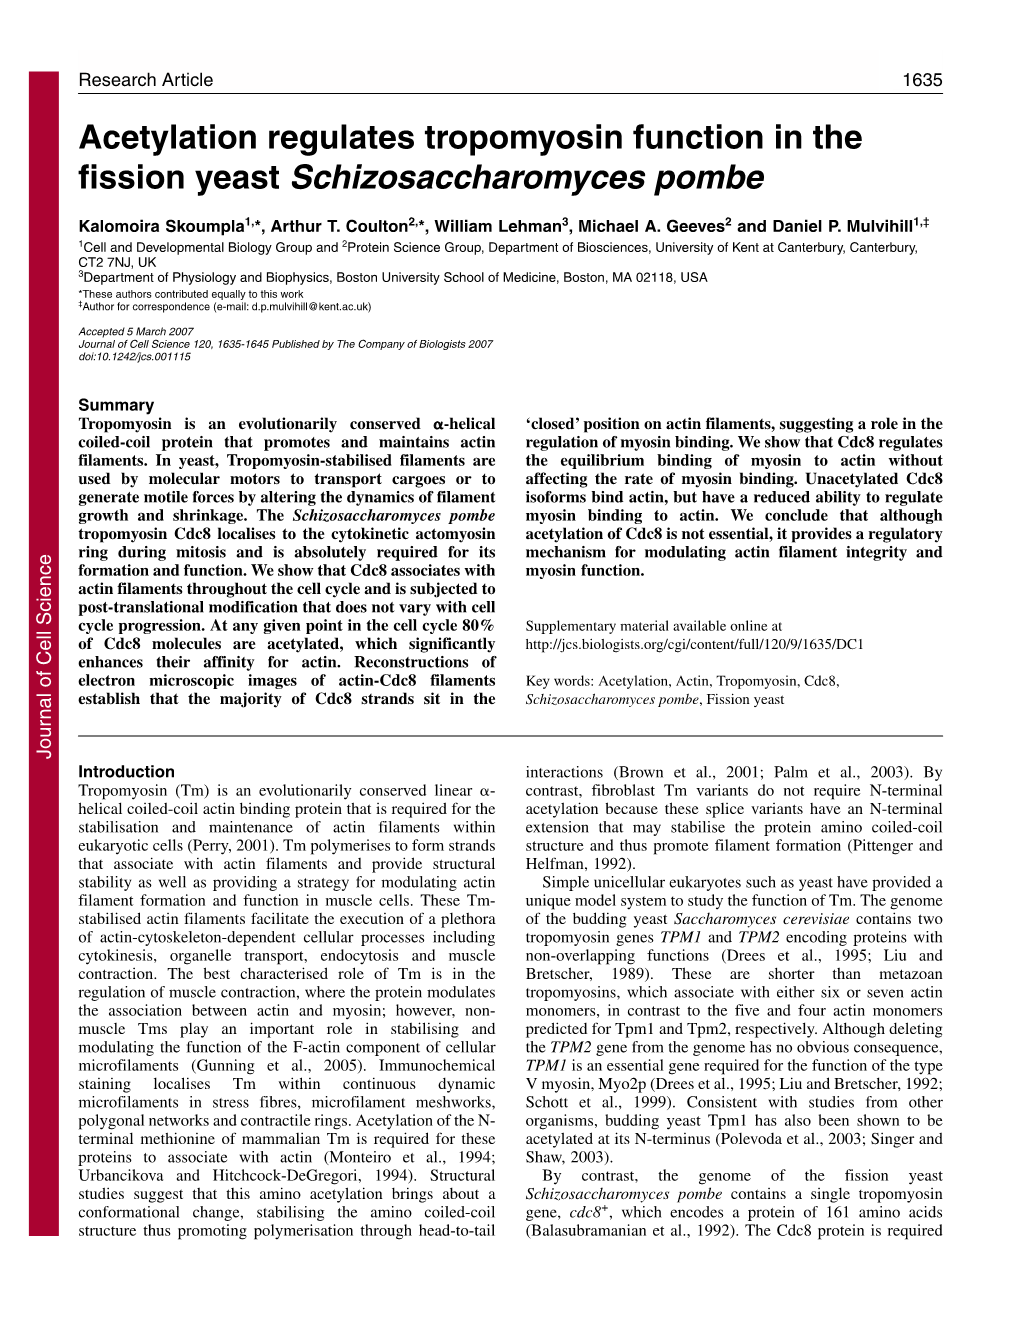 Acetylation Regulates Tropomyosin Function in the Fission Yeast Schizosaccharomyces Pombe